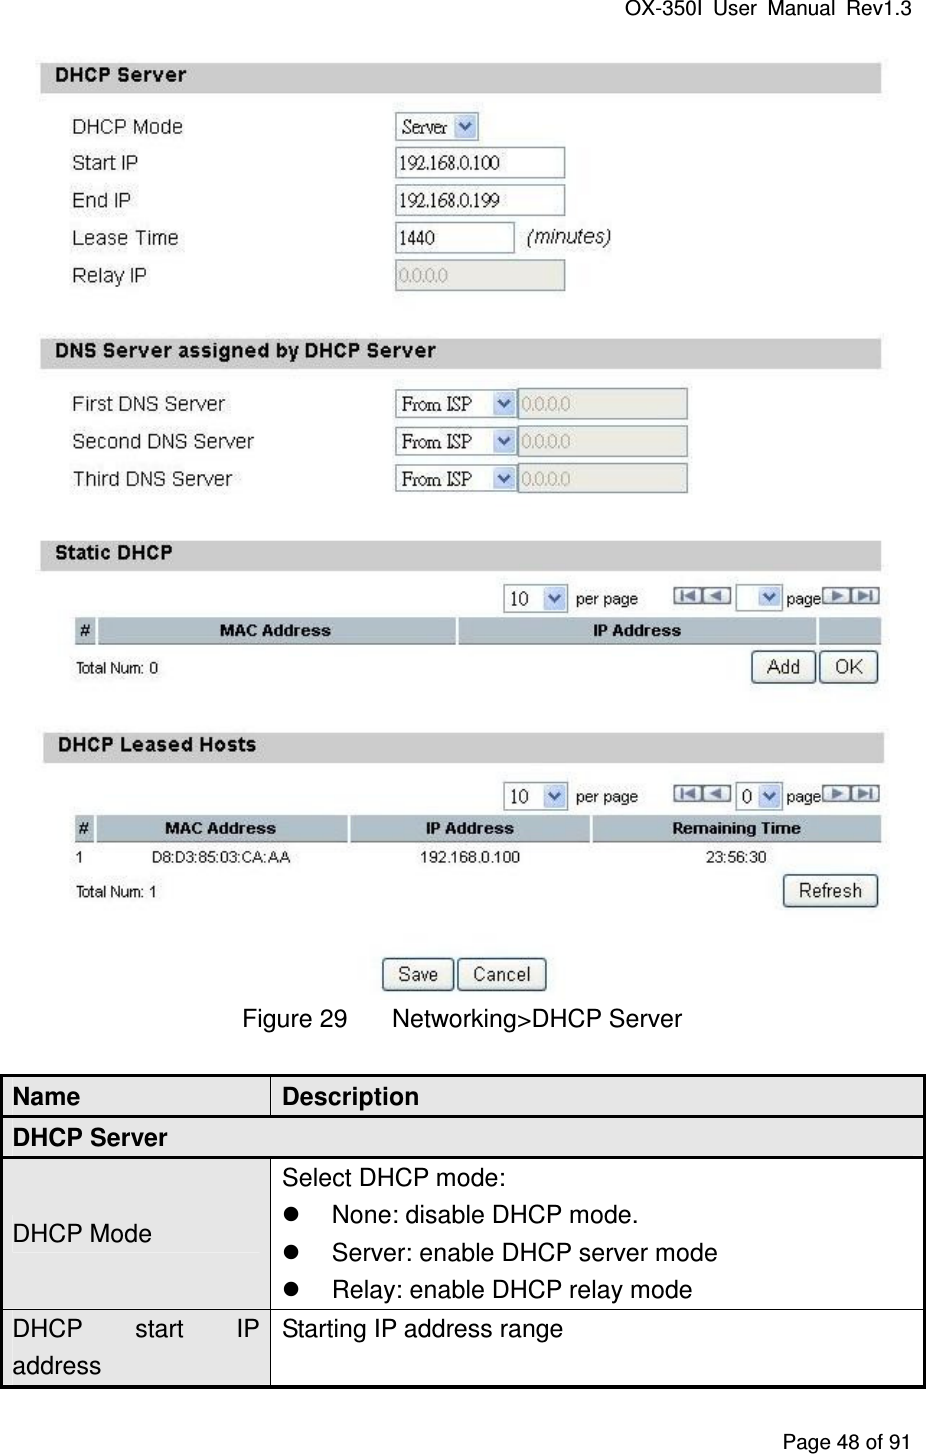 OX-350I  User  Manual  Rev1.3 Page 48 of 91  Figure 29  Networking&gt;DHCP Server Name  Description DHCP Server DHCP Mode Select DHCP mode:   None: disable DHCP mode.   Server: enable DHCP server mode   Relay: enable DHCP relay mode DHCP  start  IP address Starting IP address range 